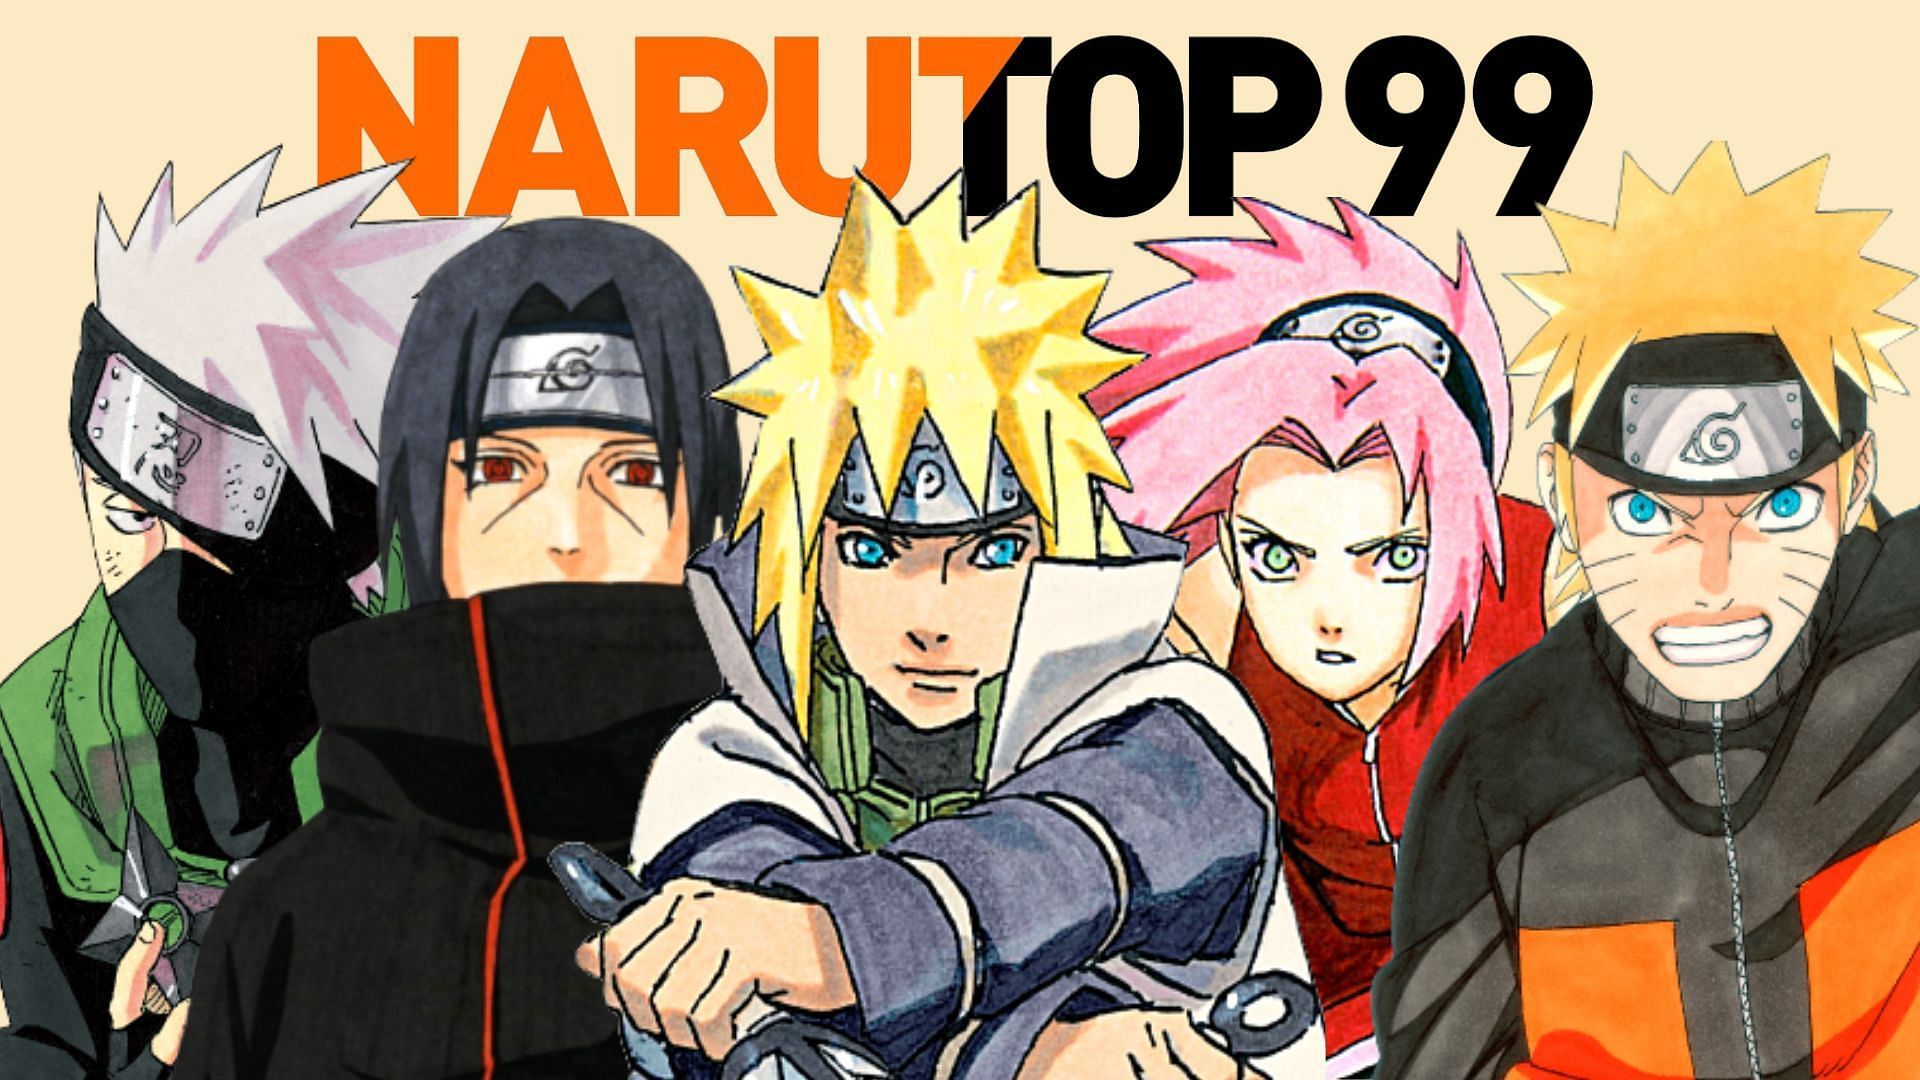 Top 7 Naruto Characters Ranked by Popularity